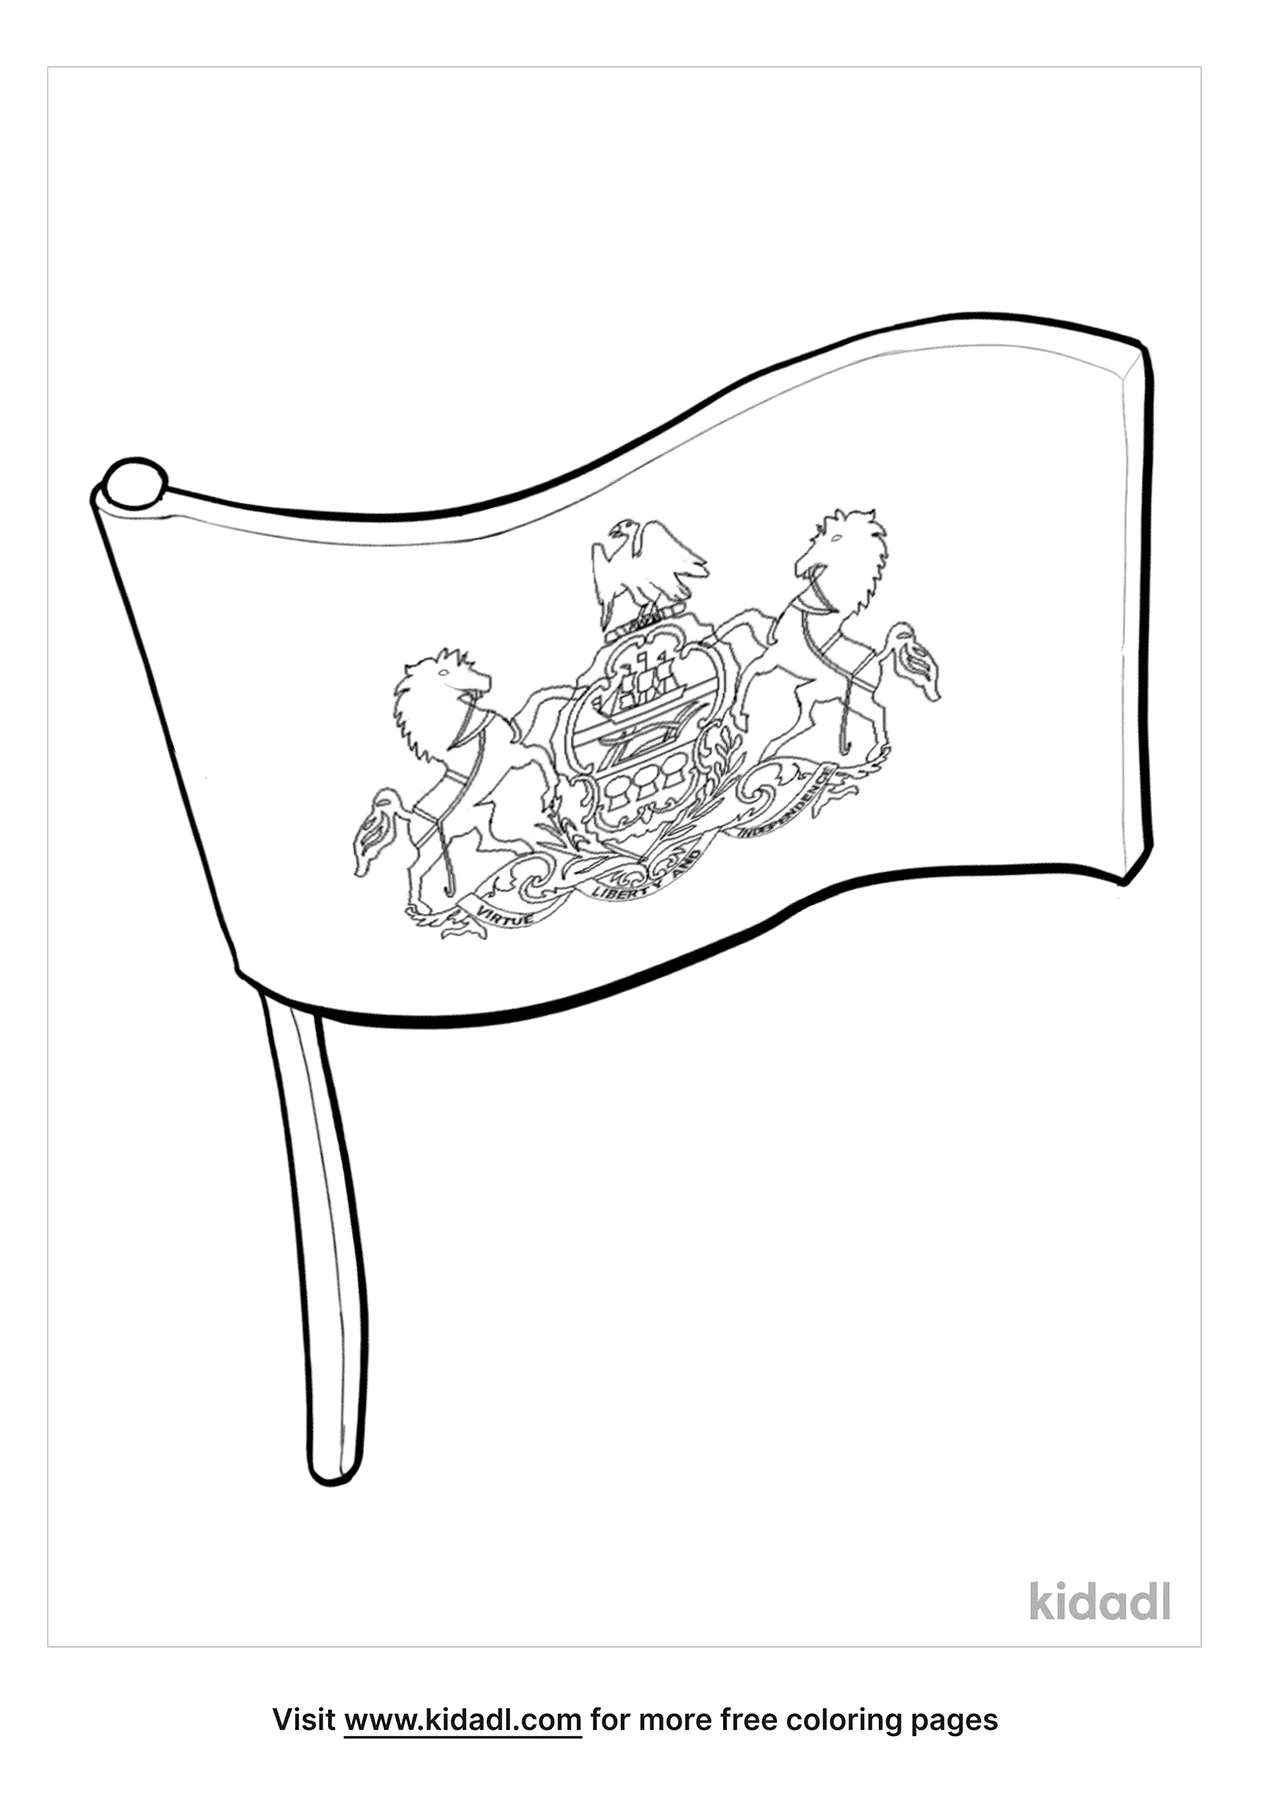 penn state printable coloring pages